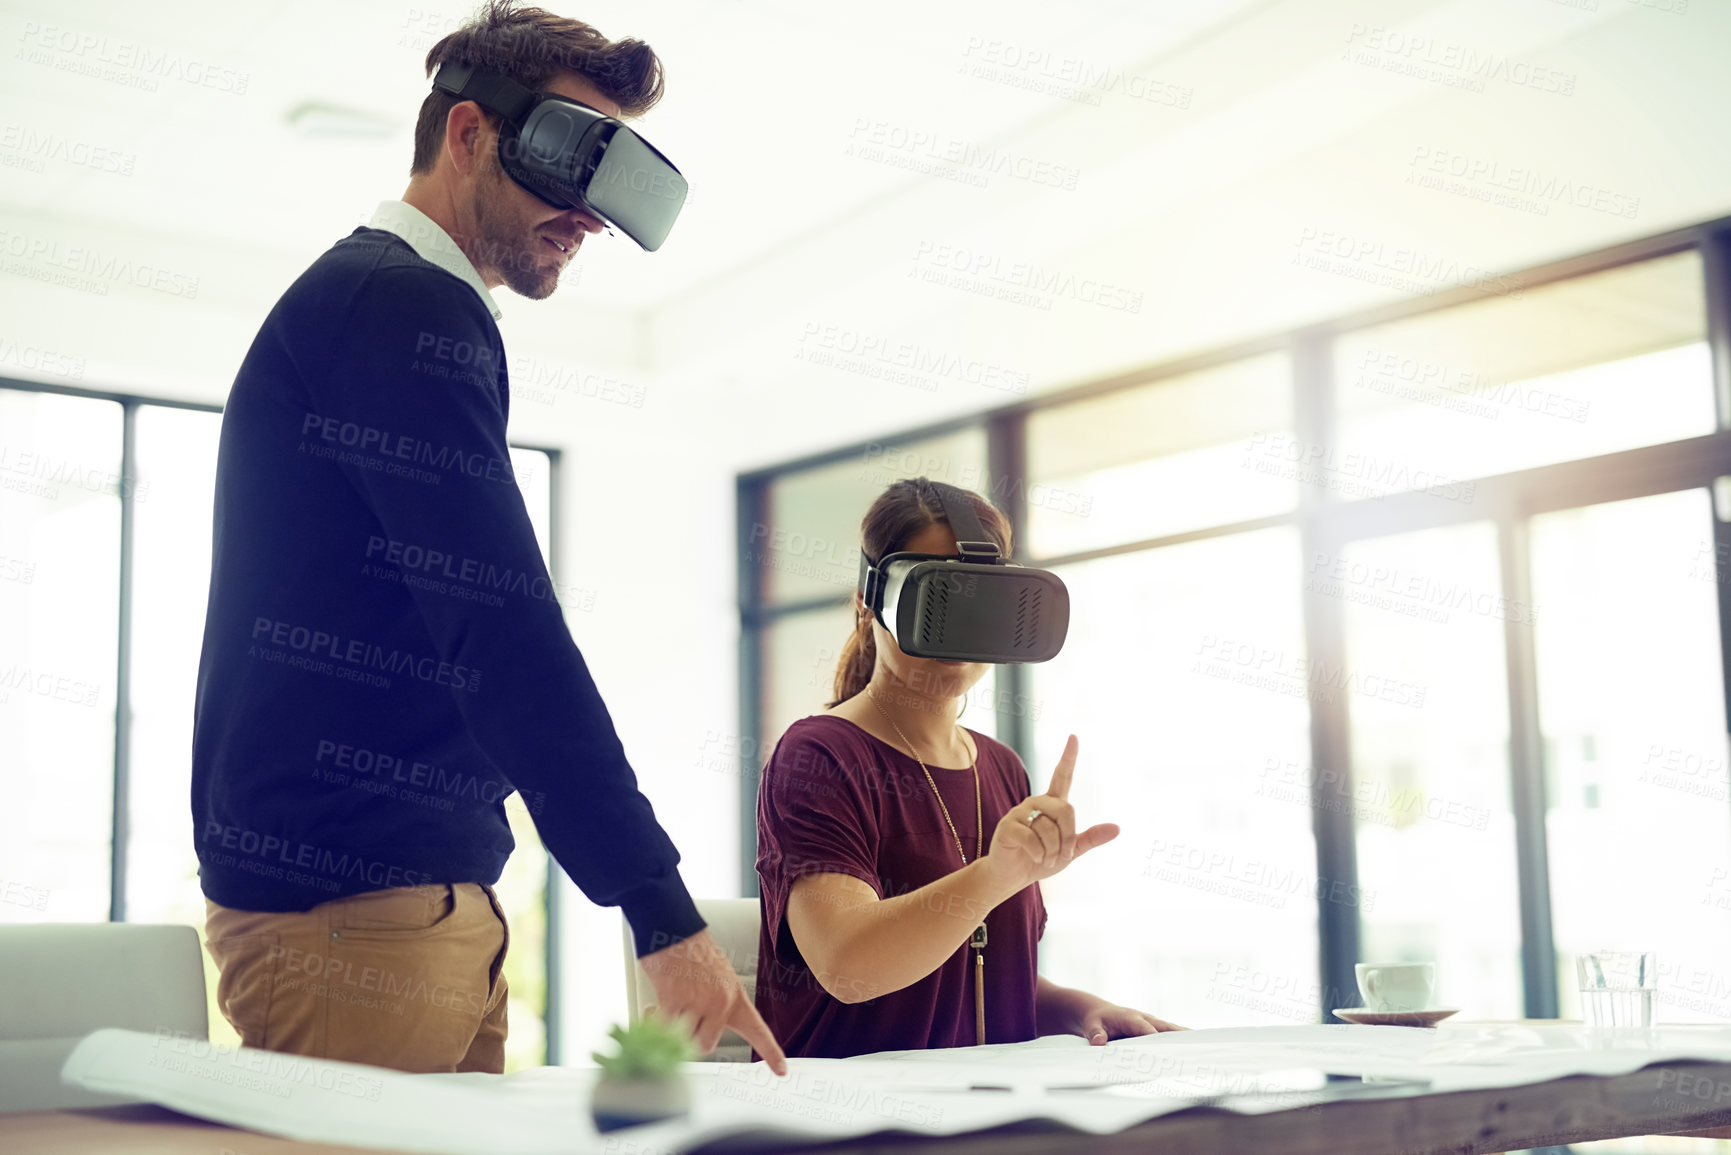 Buy stock photo Shot of two businesspeople wearing VR headsets while working together in an office